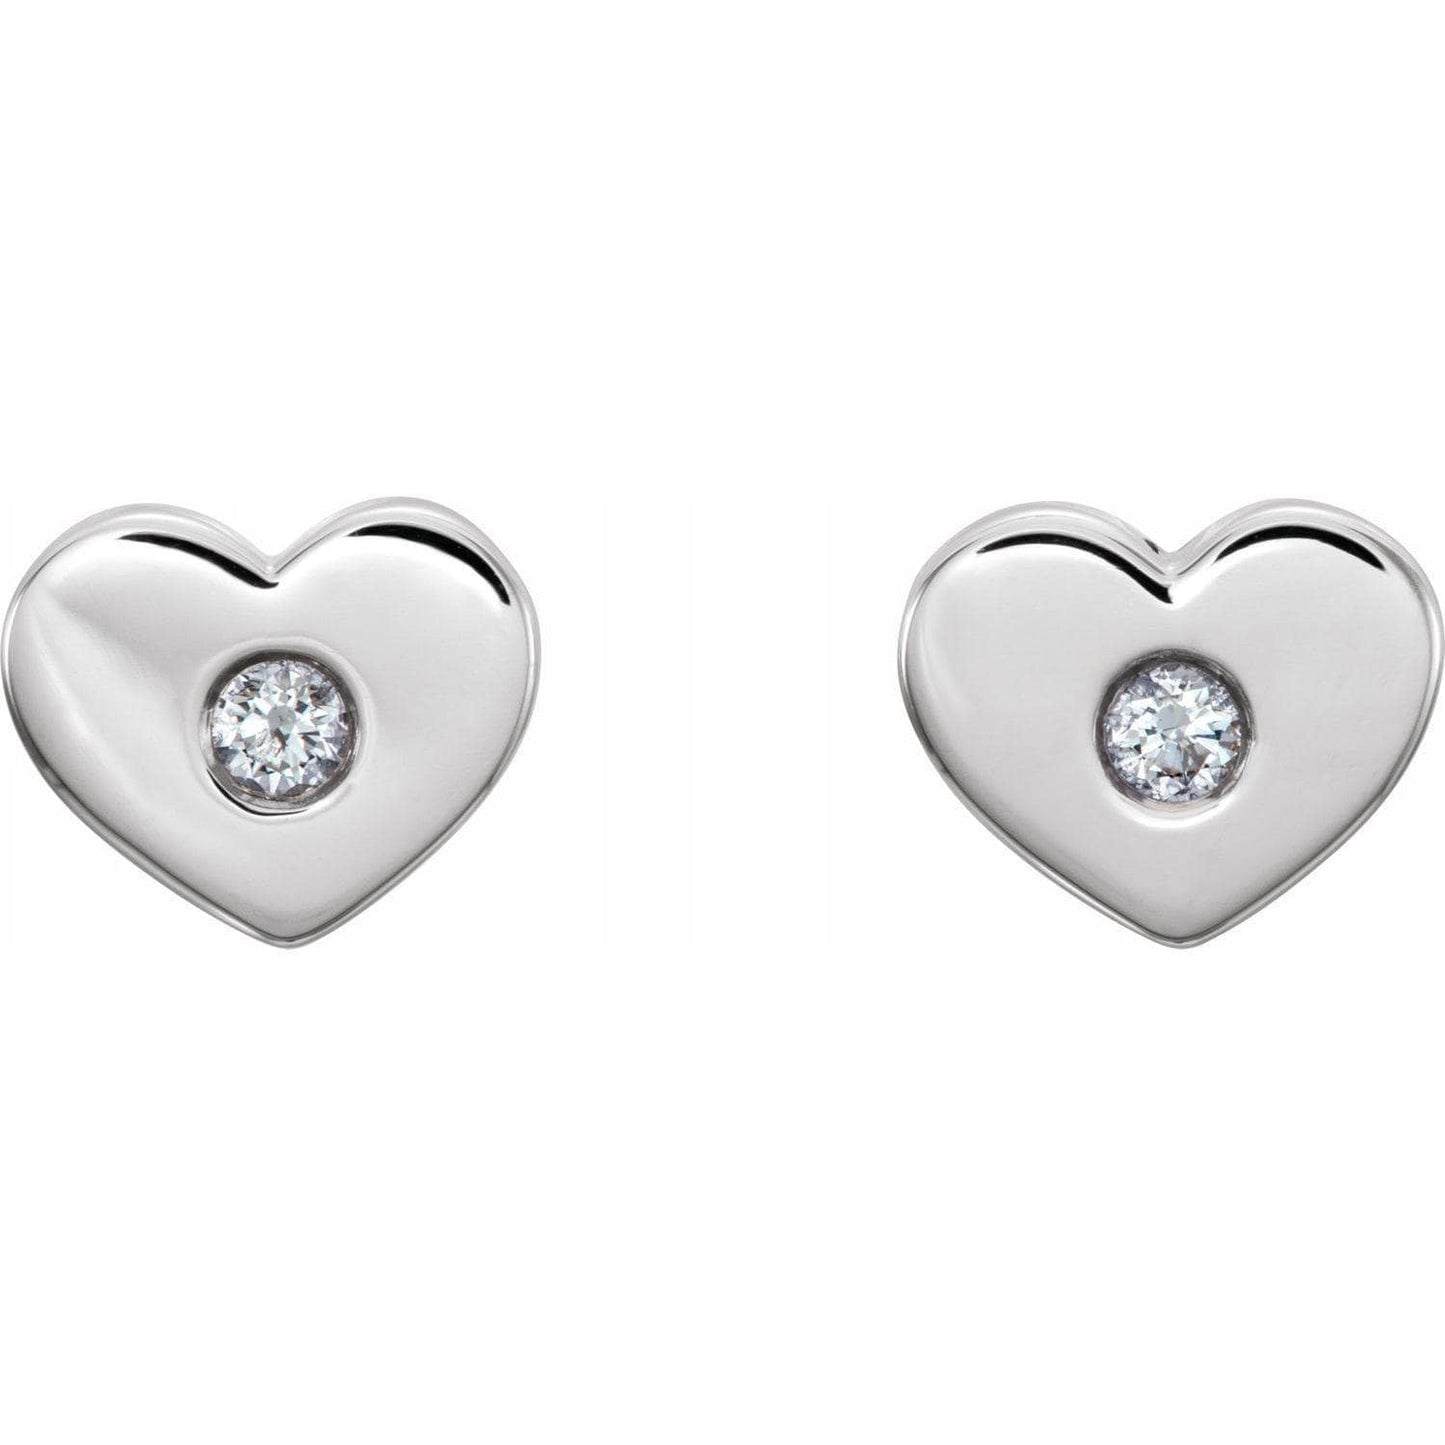 14k Gold Heart Stud Earring with Diamond Accent 14k White Gold Earrings by Nodeform